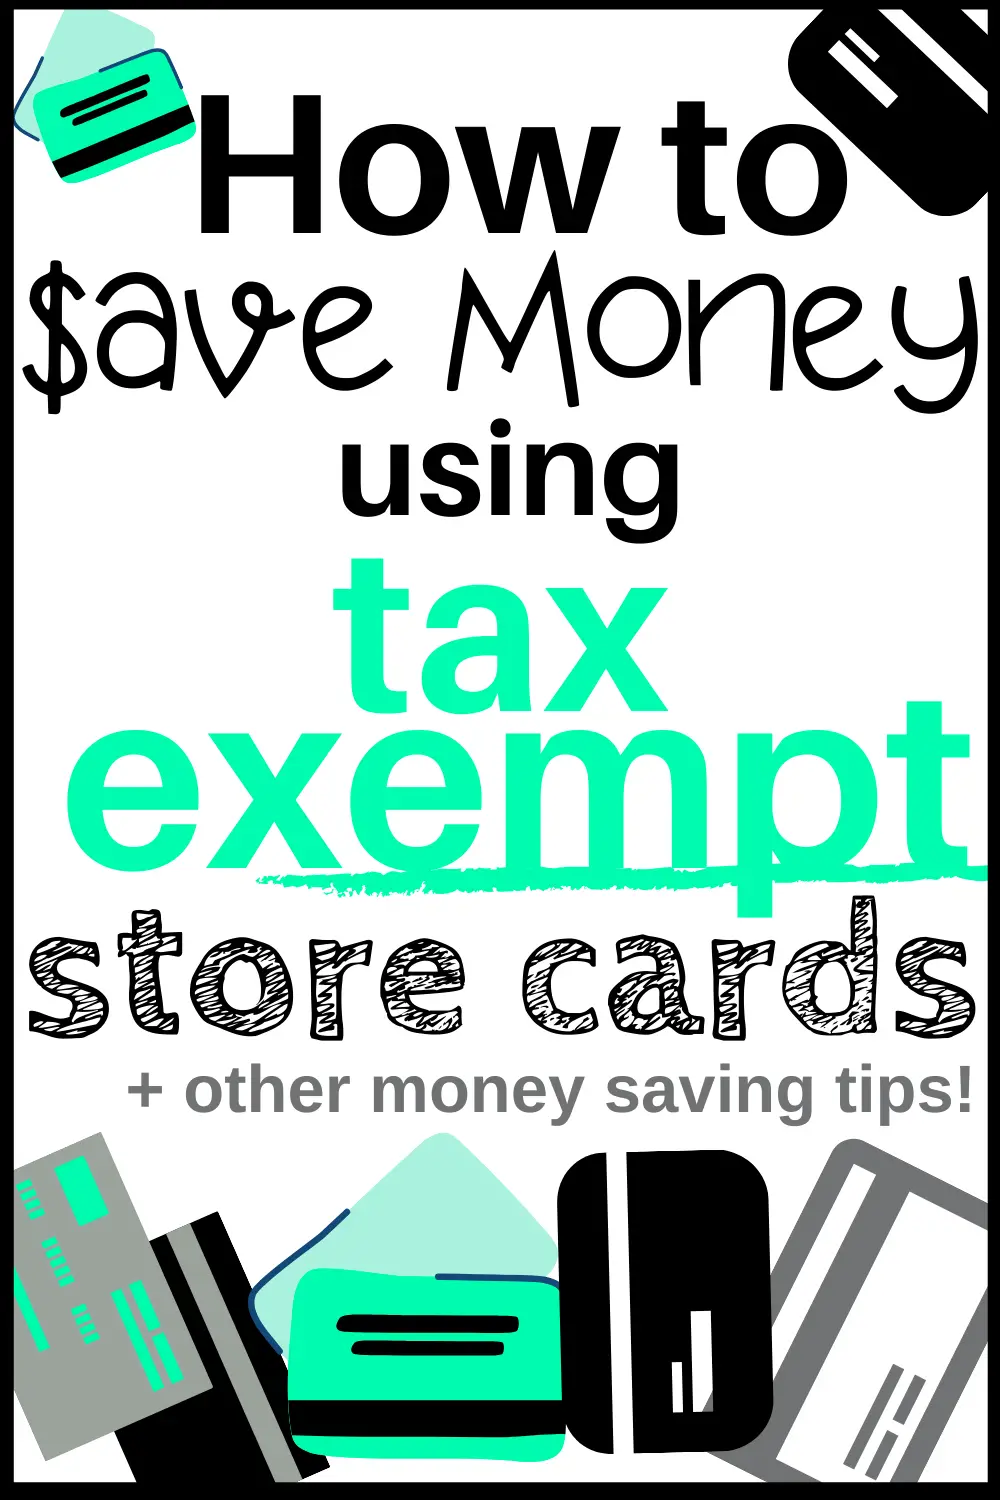 How to Save Money on Tax